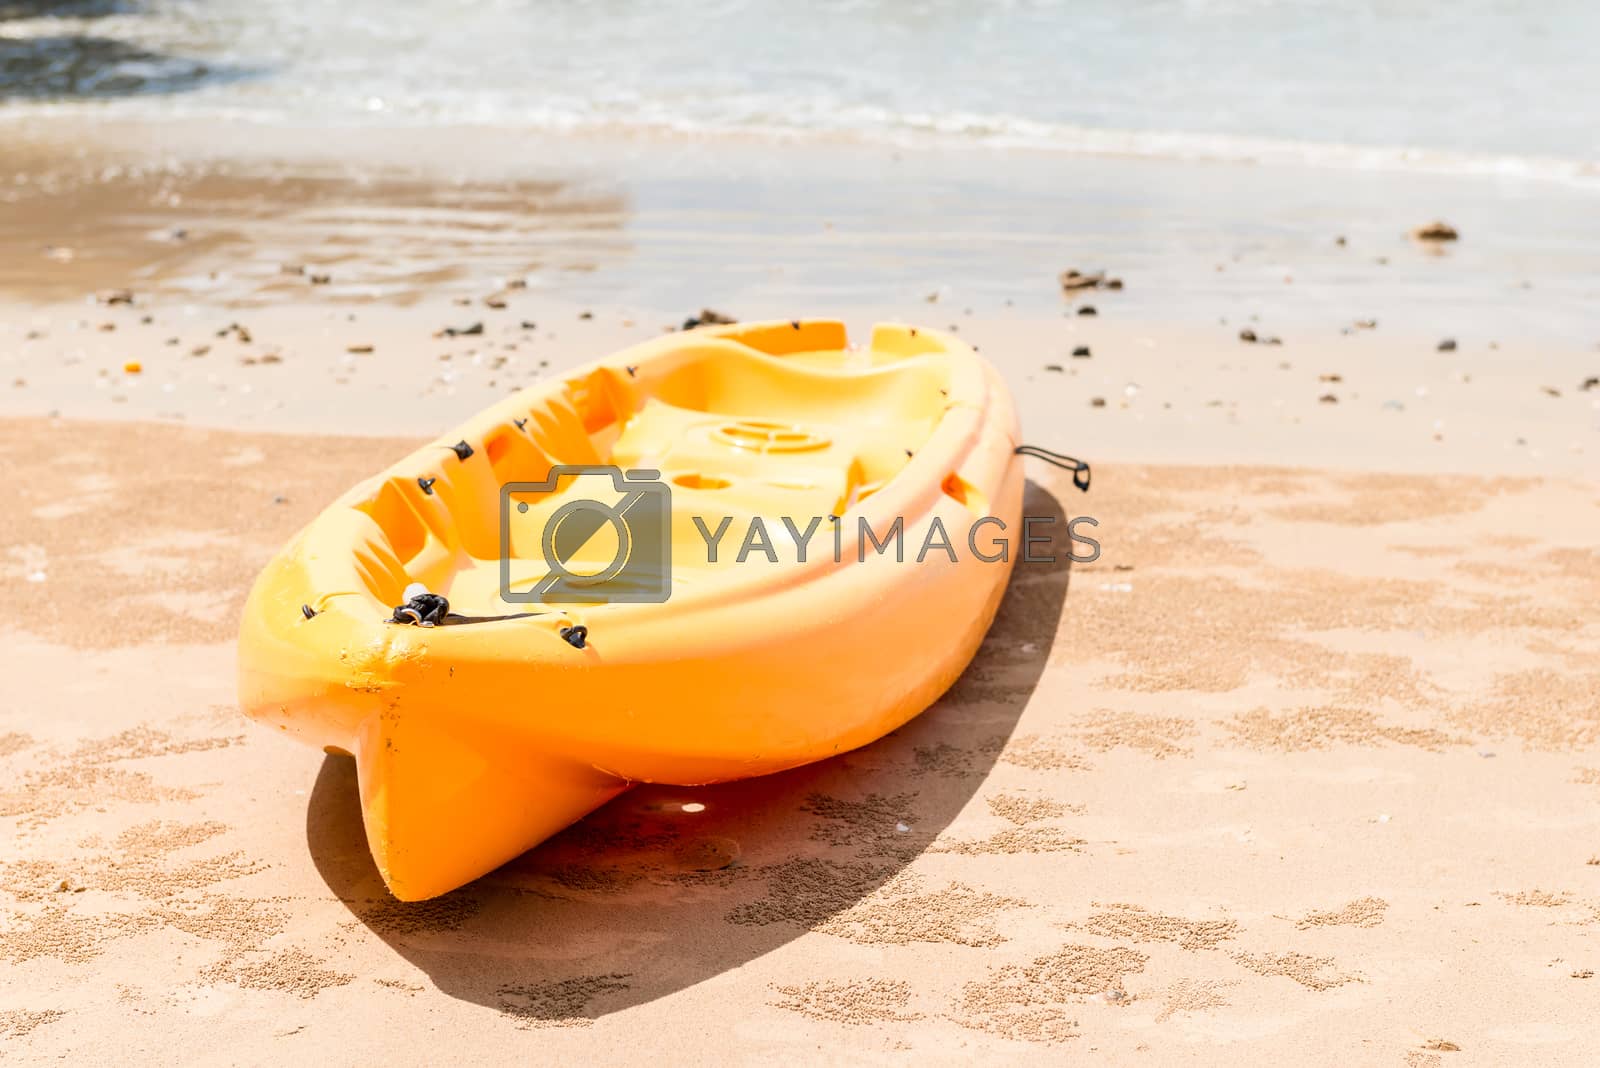 Royalty free image of a kayak for active sports on the water lies on a sandy beach by kosmsos111